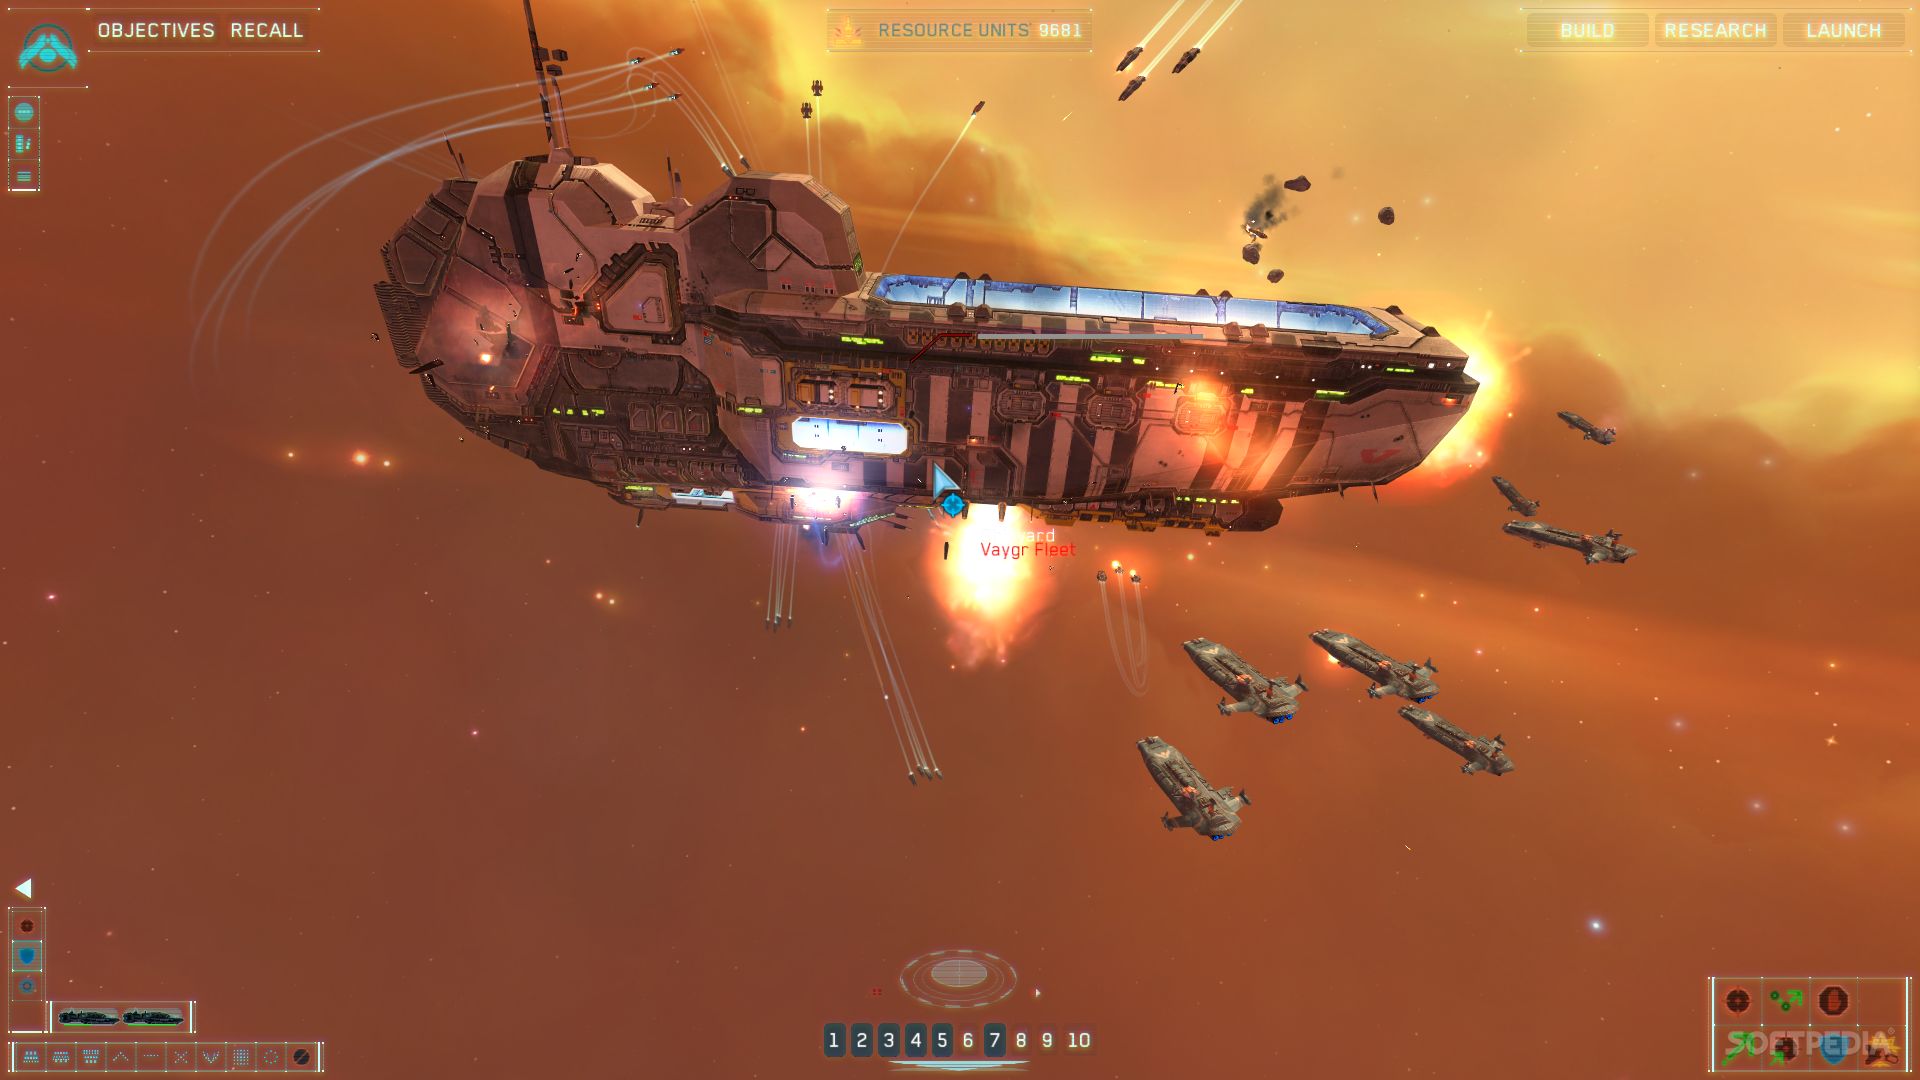 homeworld remastered free download for pc